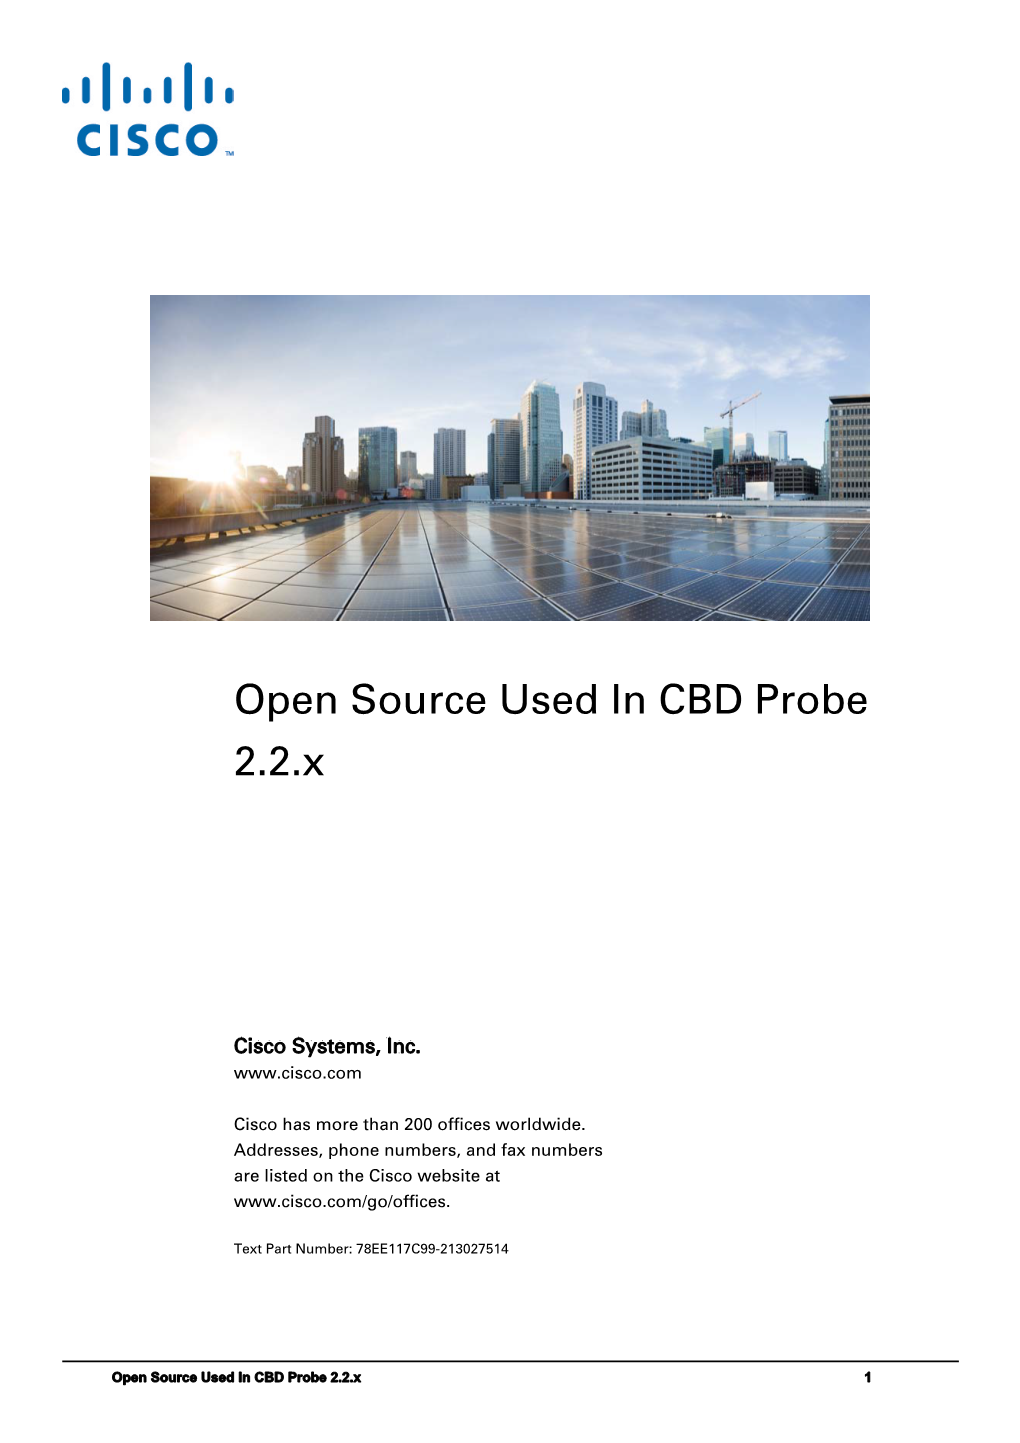 Open Source Used in Cisco Business Dashboard Probe, Version 2.2.X